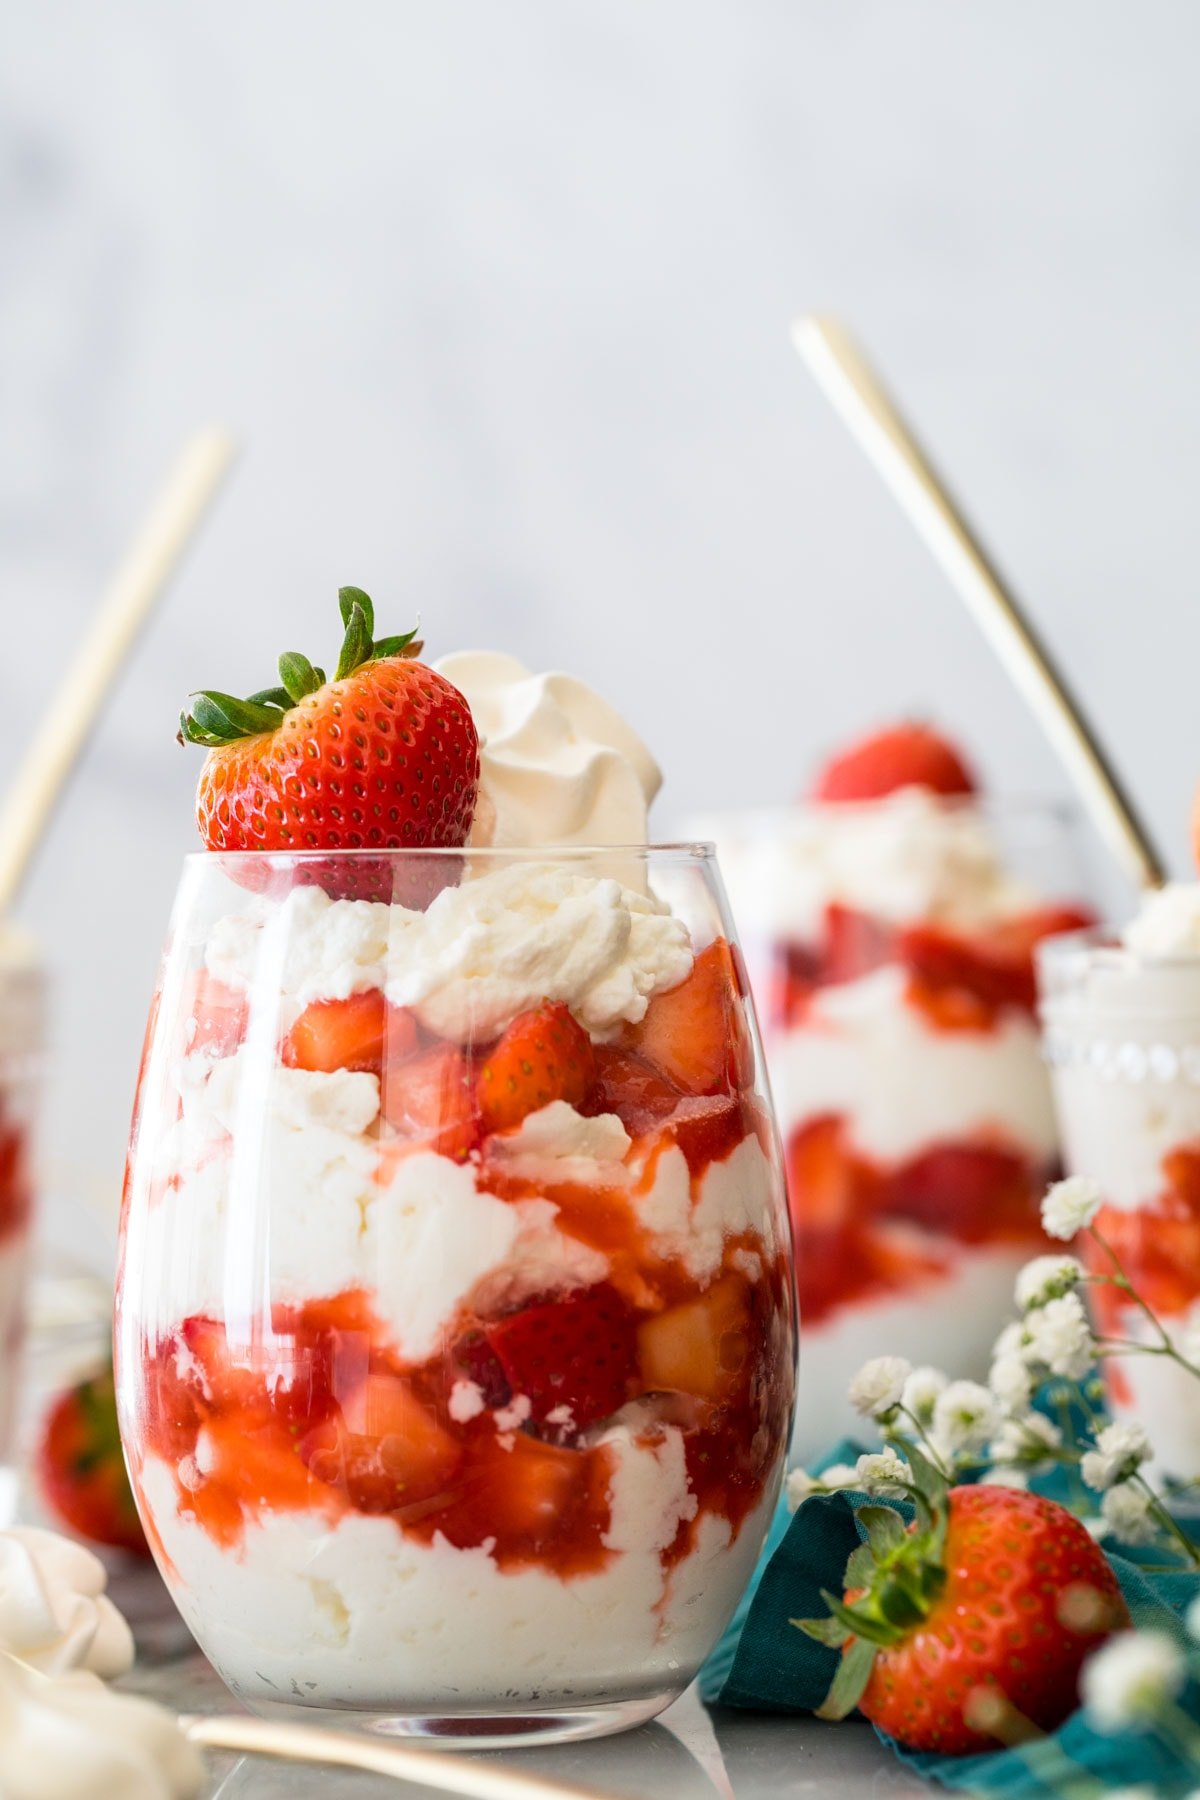 glasses of eton mess (layers of whipped cream/meringue and strawberries)